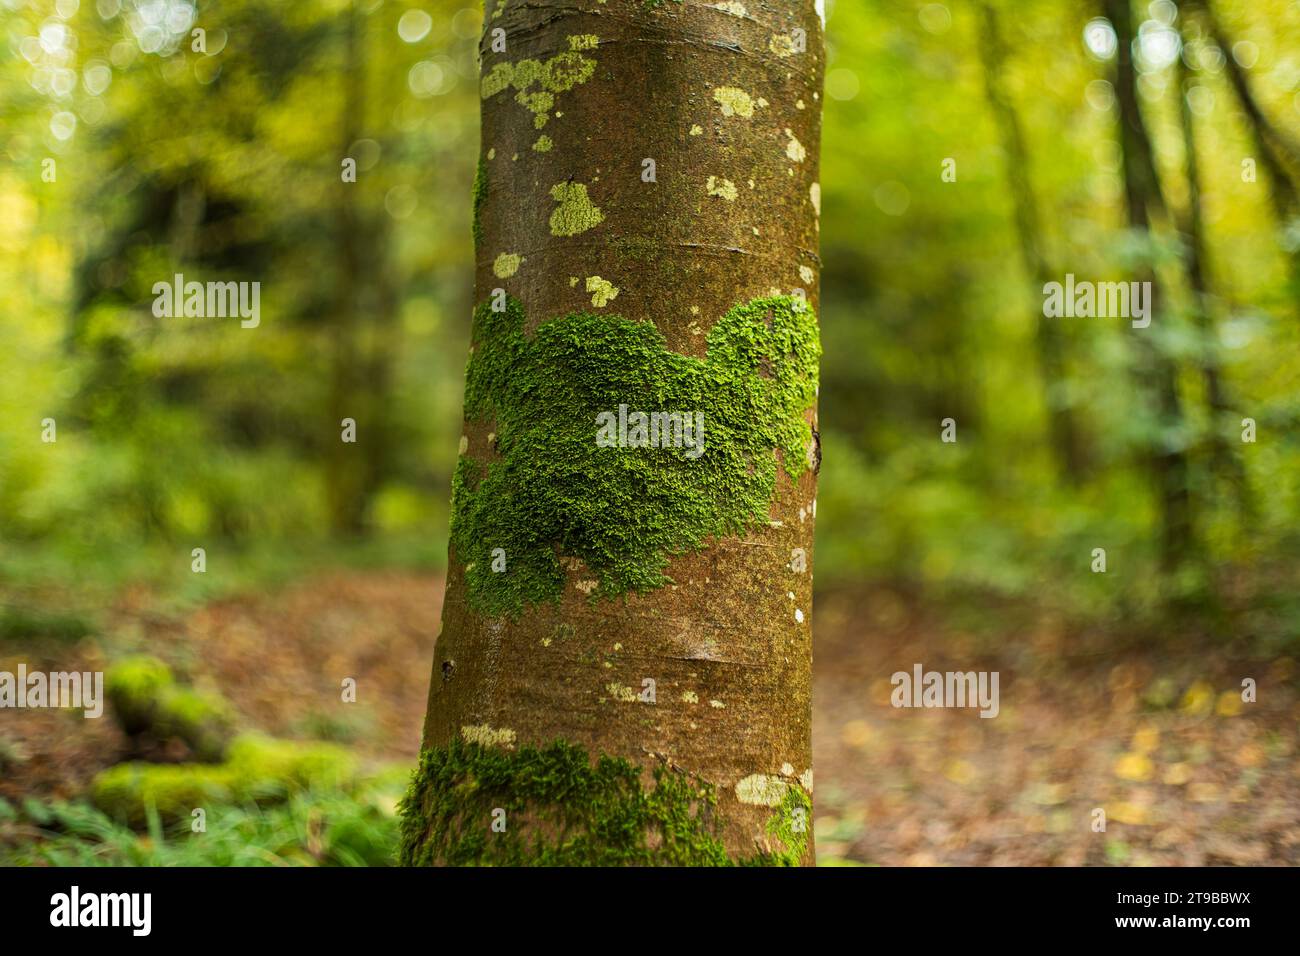 Green moss on tree trunk bark in a forest. Close up shot, autumn colors, shallow depth of field, no people. Stock Photo